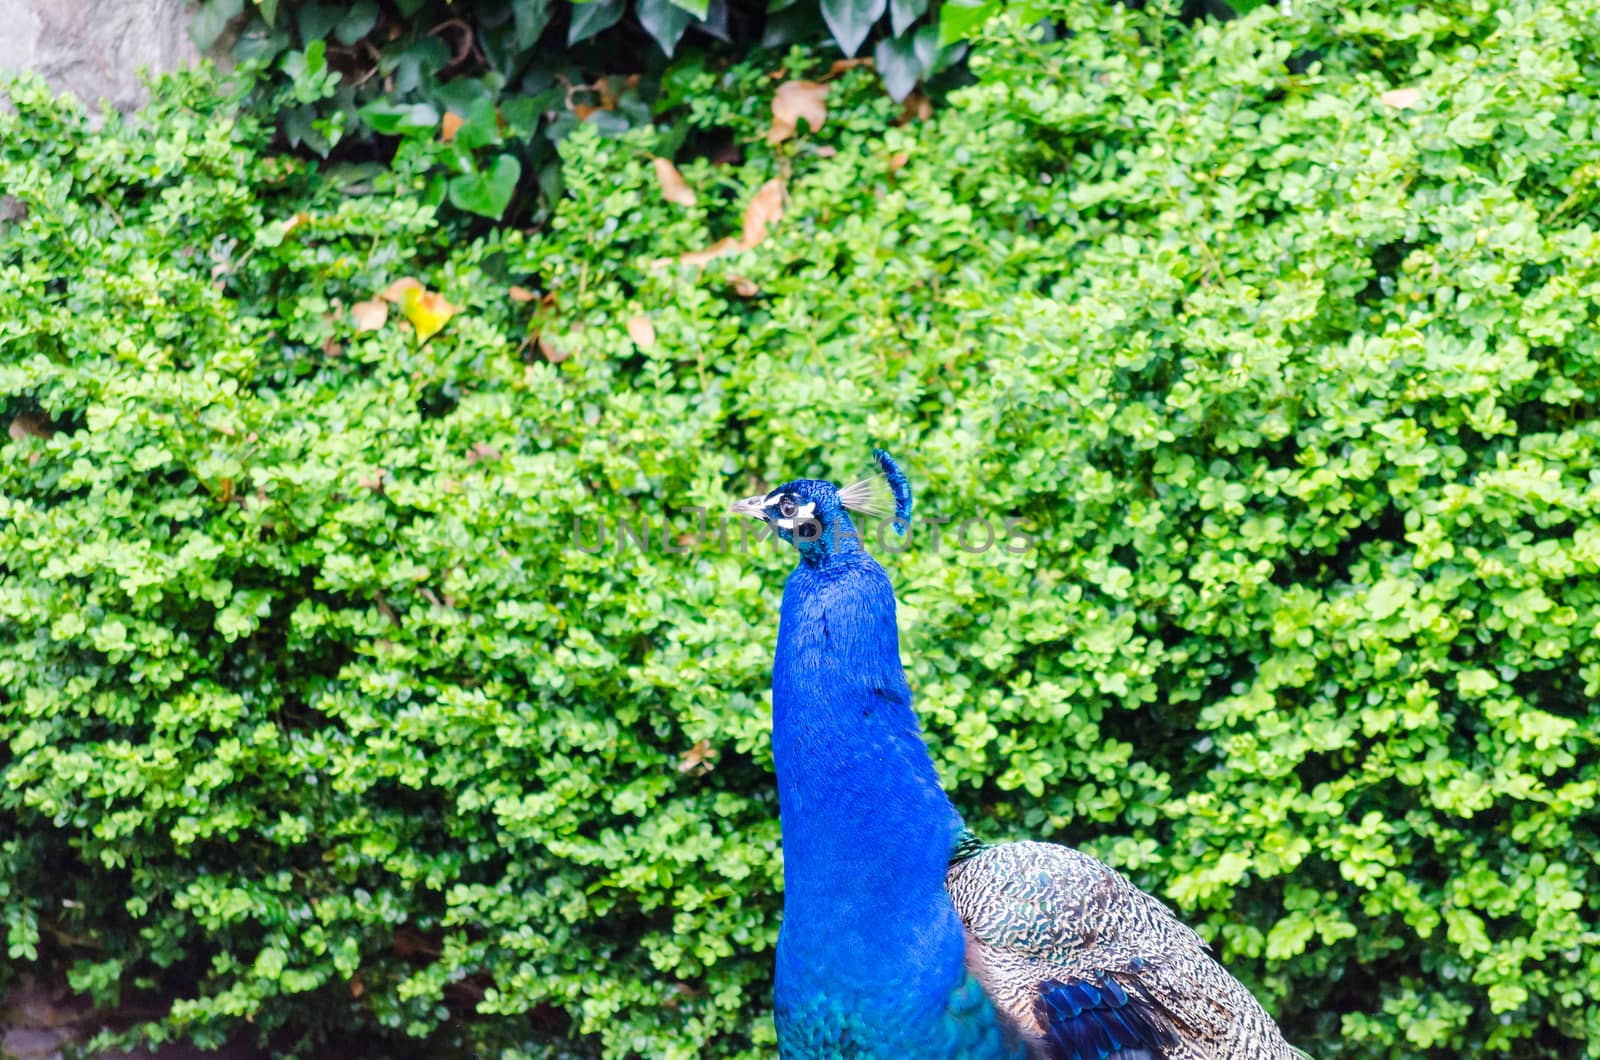 Peacock in front of green hedge